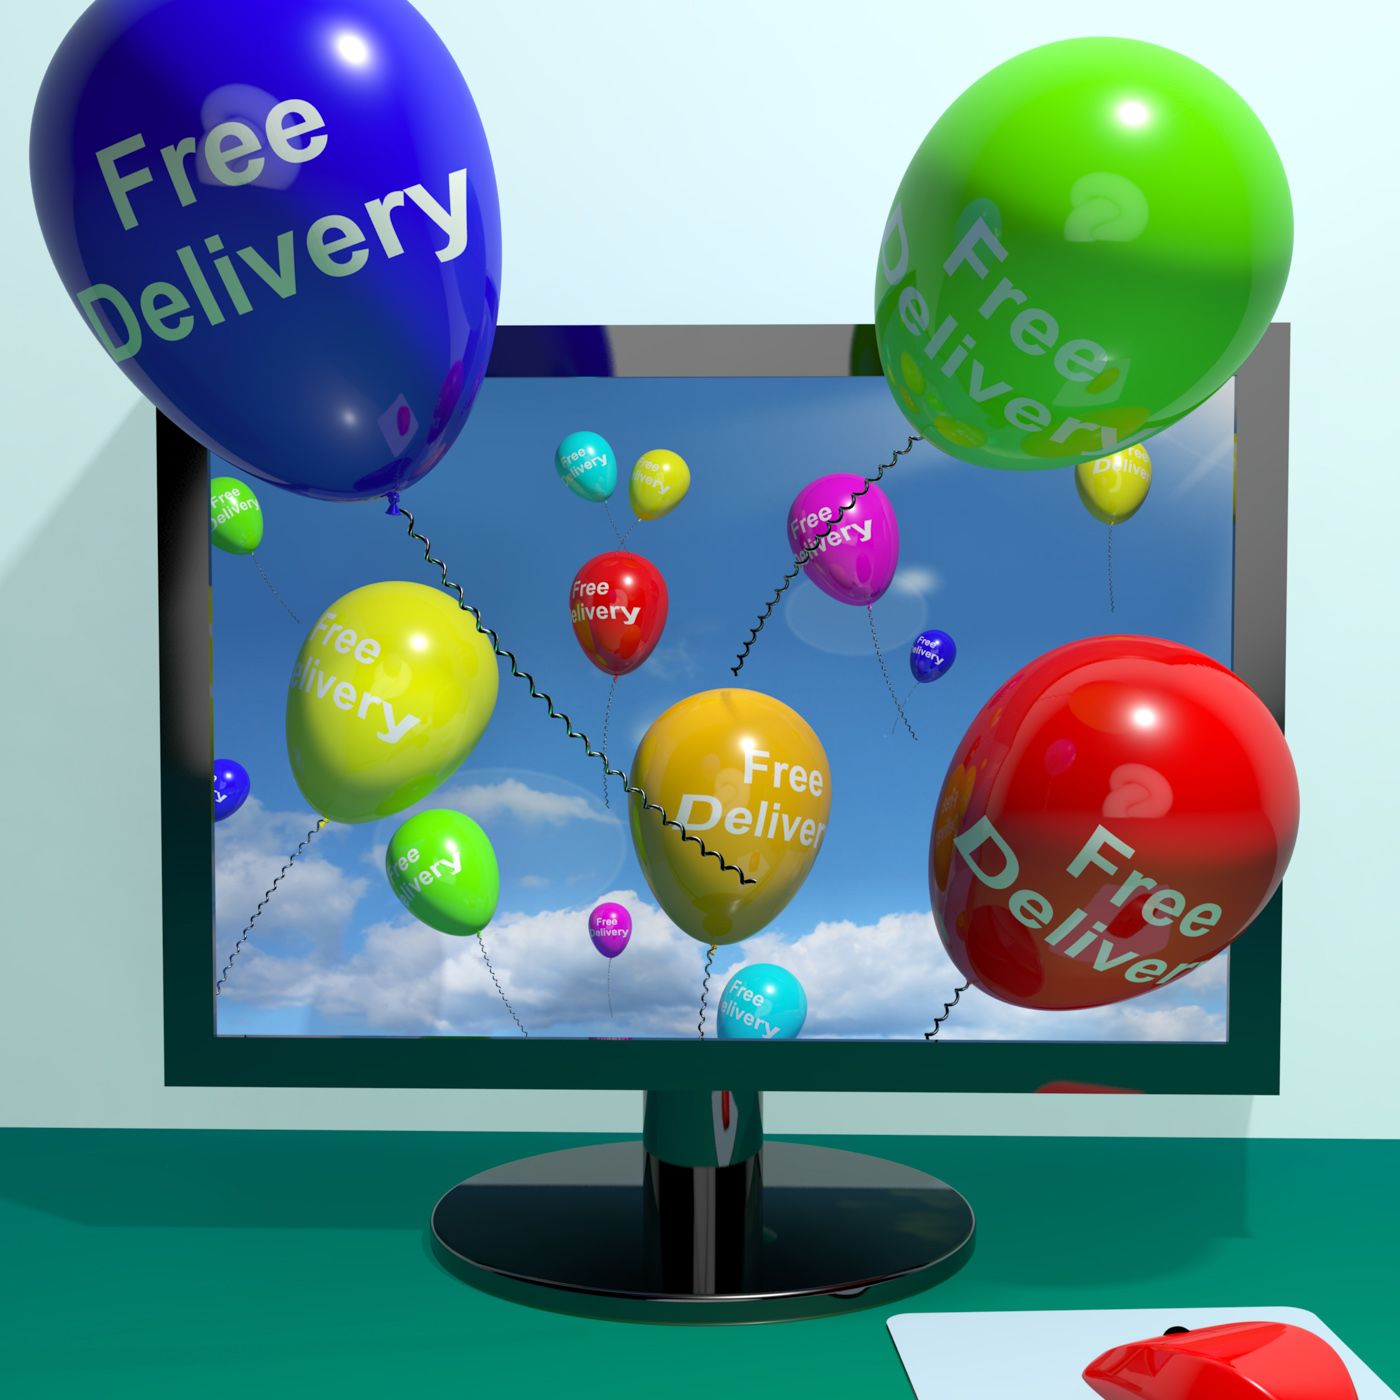 Free delivery balloons from computer showing no charge or gratis to de photo